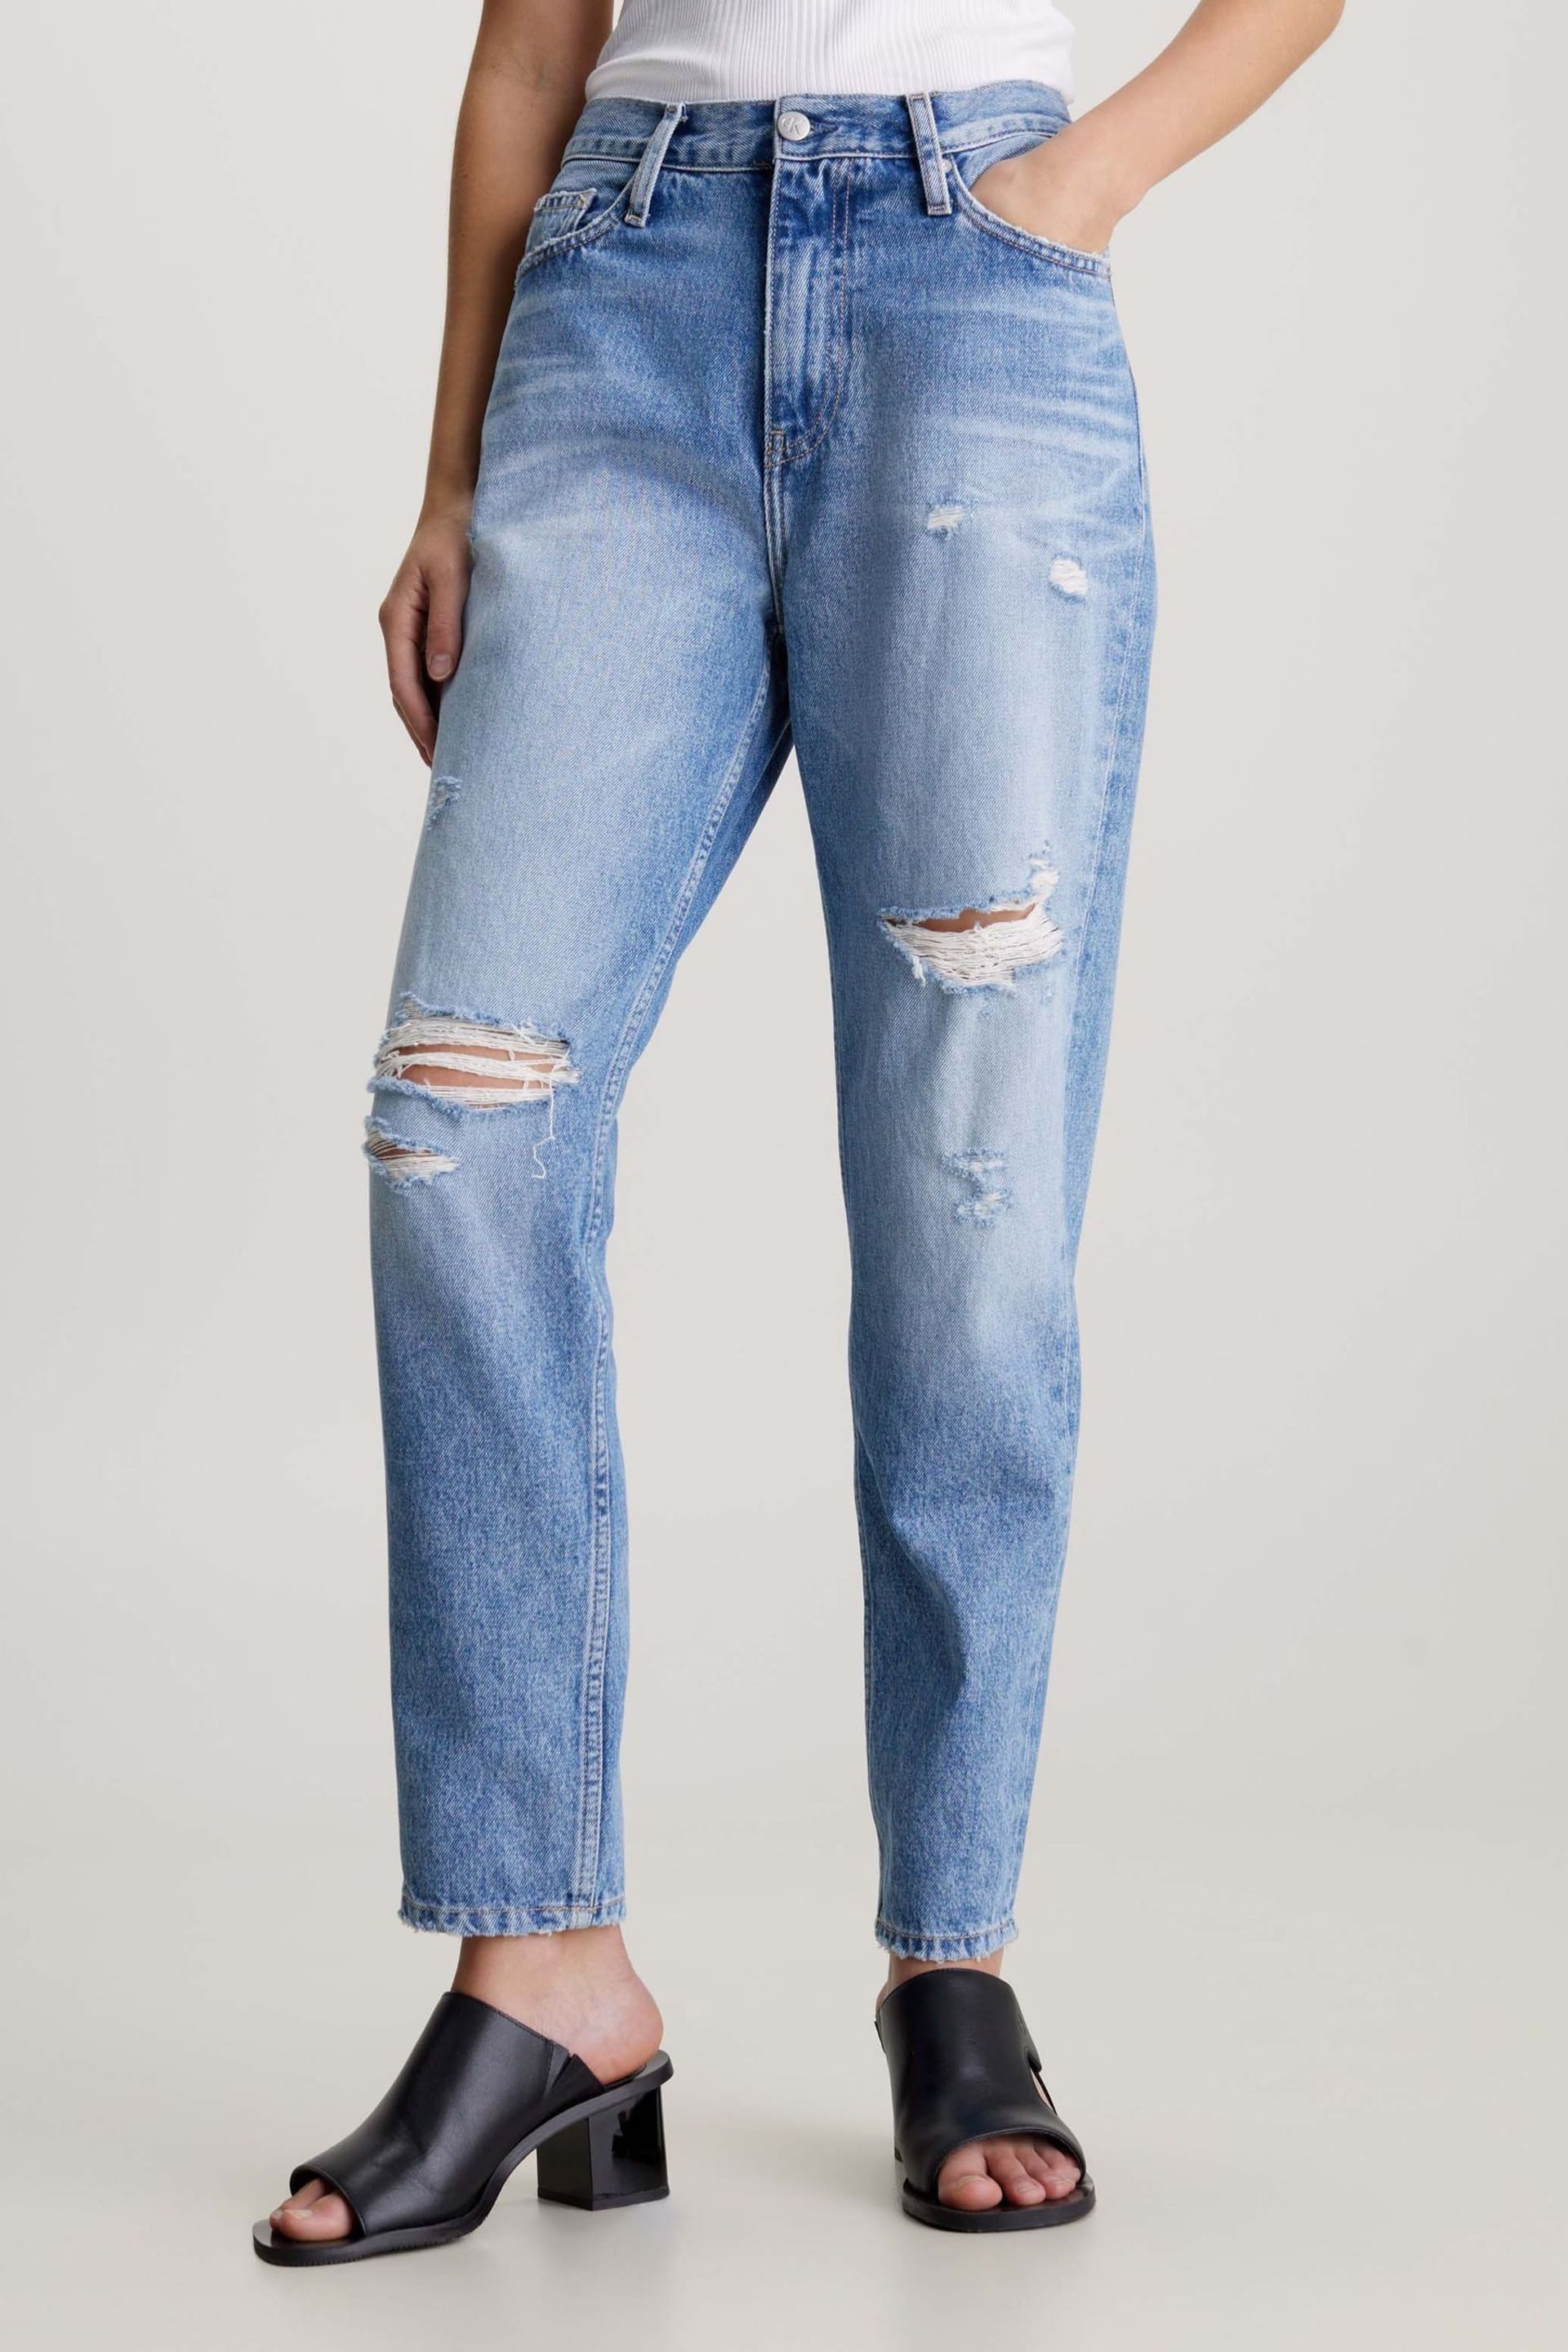 Calvin Klein Blue Mom Ripped Jeans - Image 1 of 5